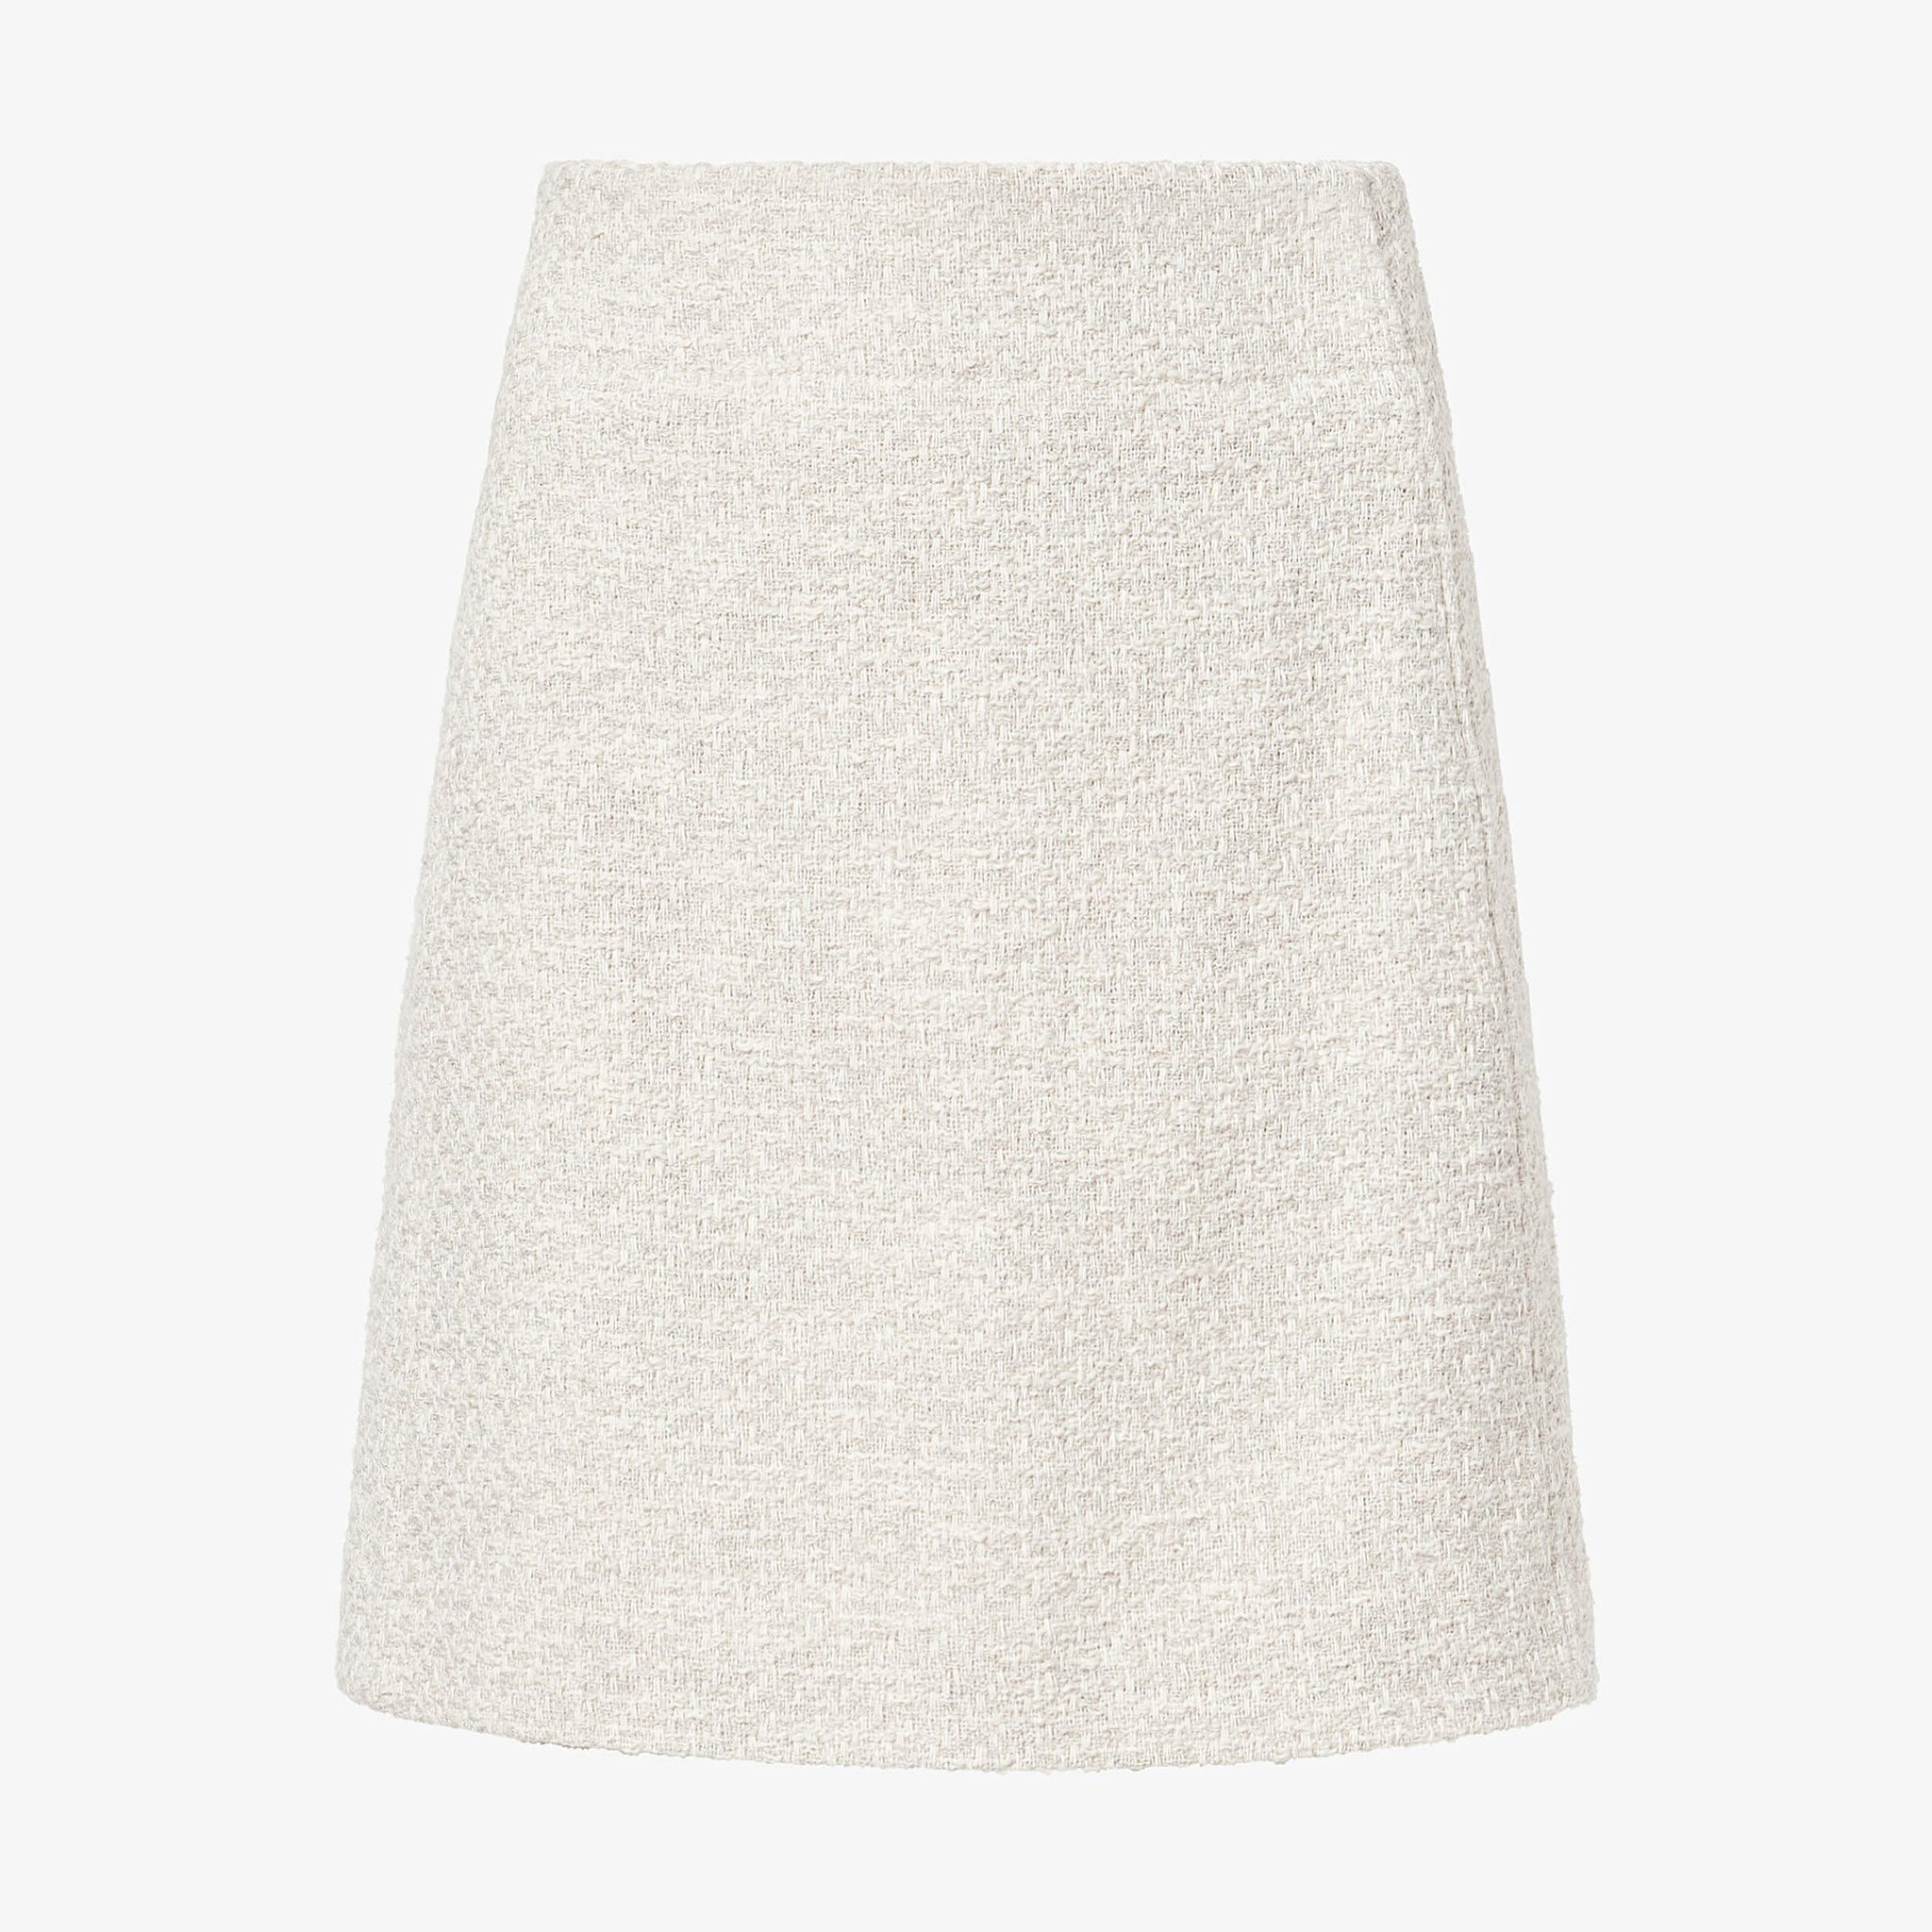 Packshot image of the rowley skirt in cotton boucle in sea salt / ivory